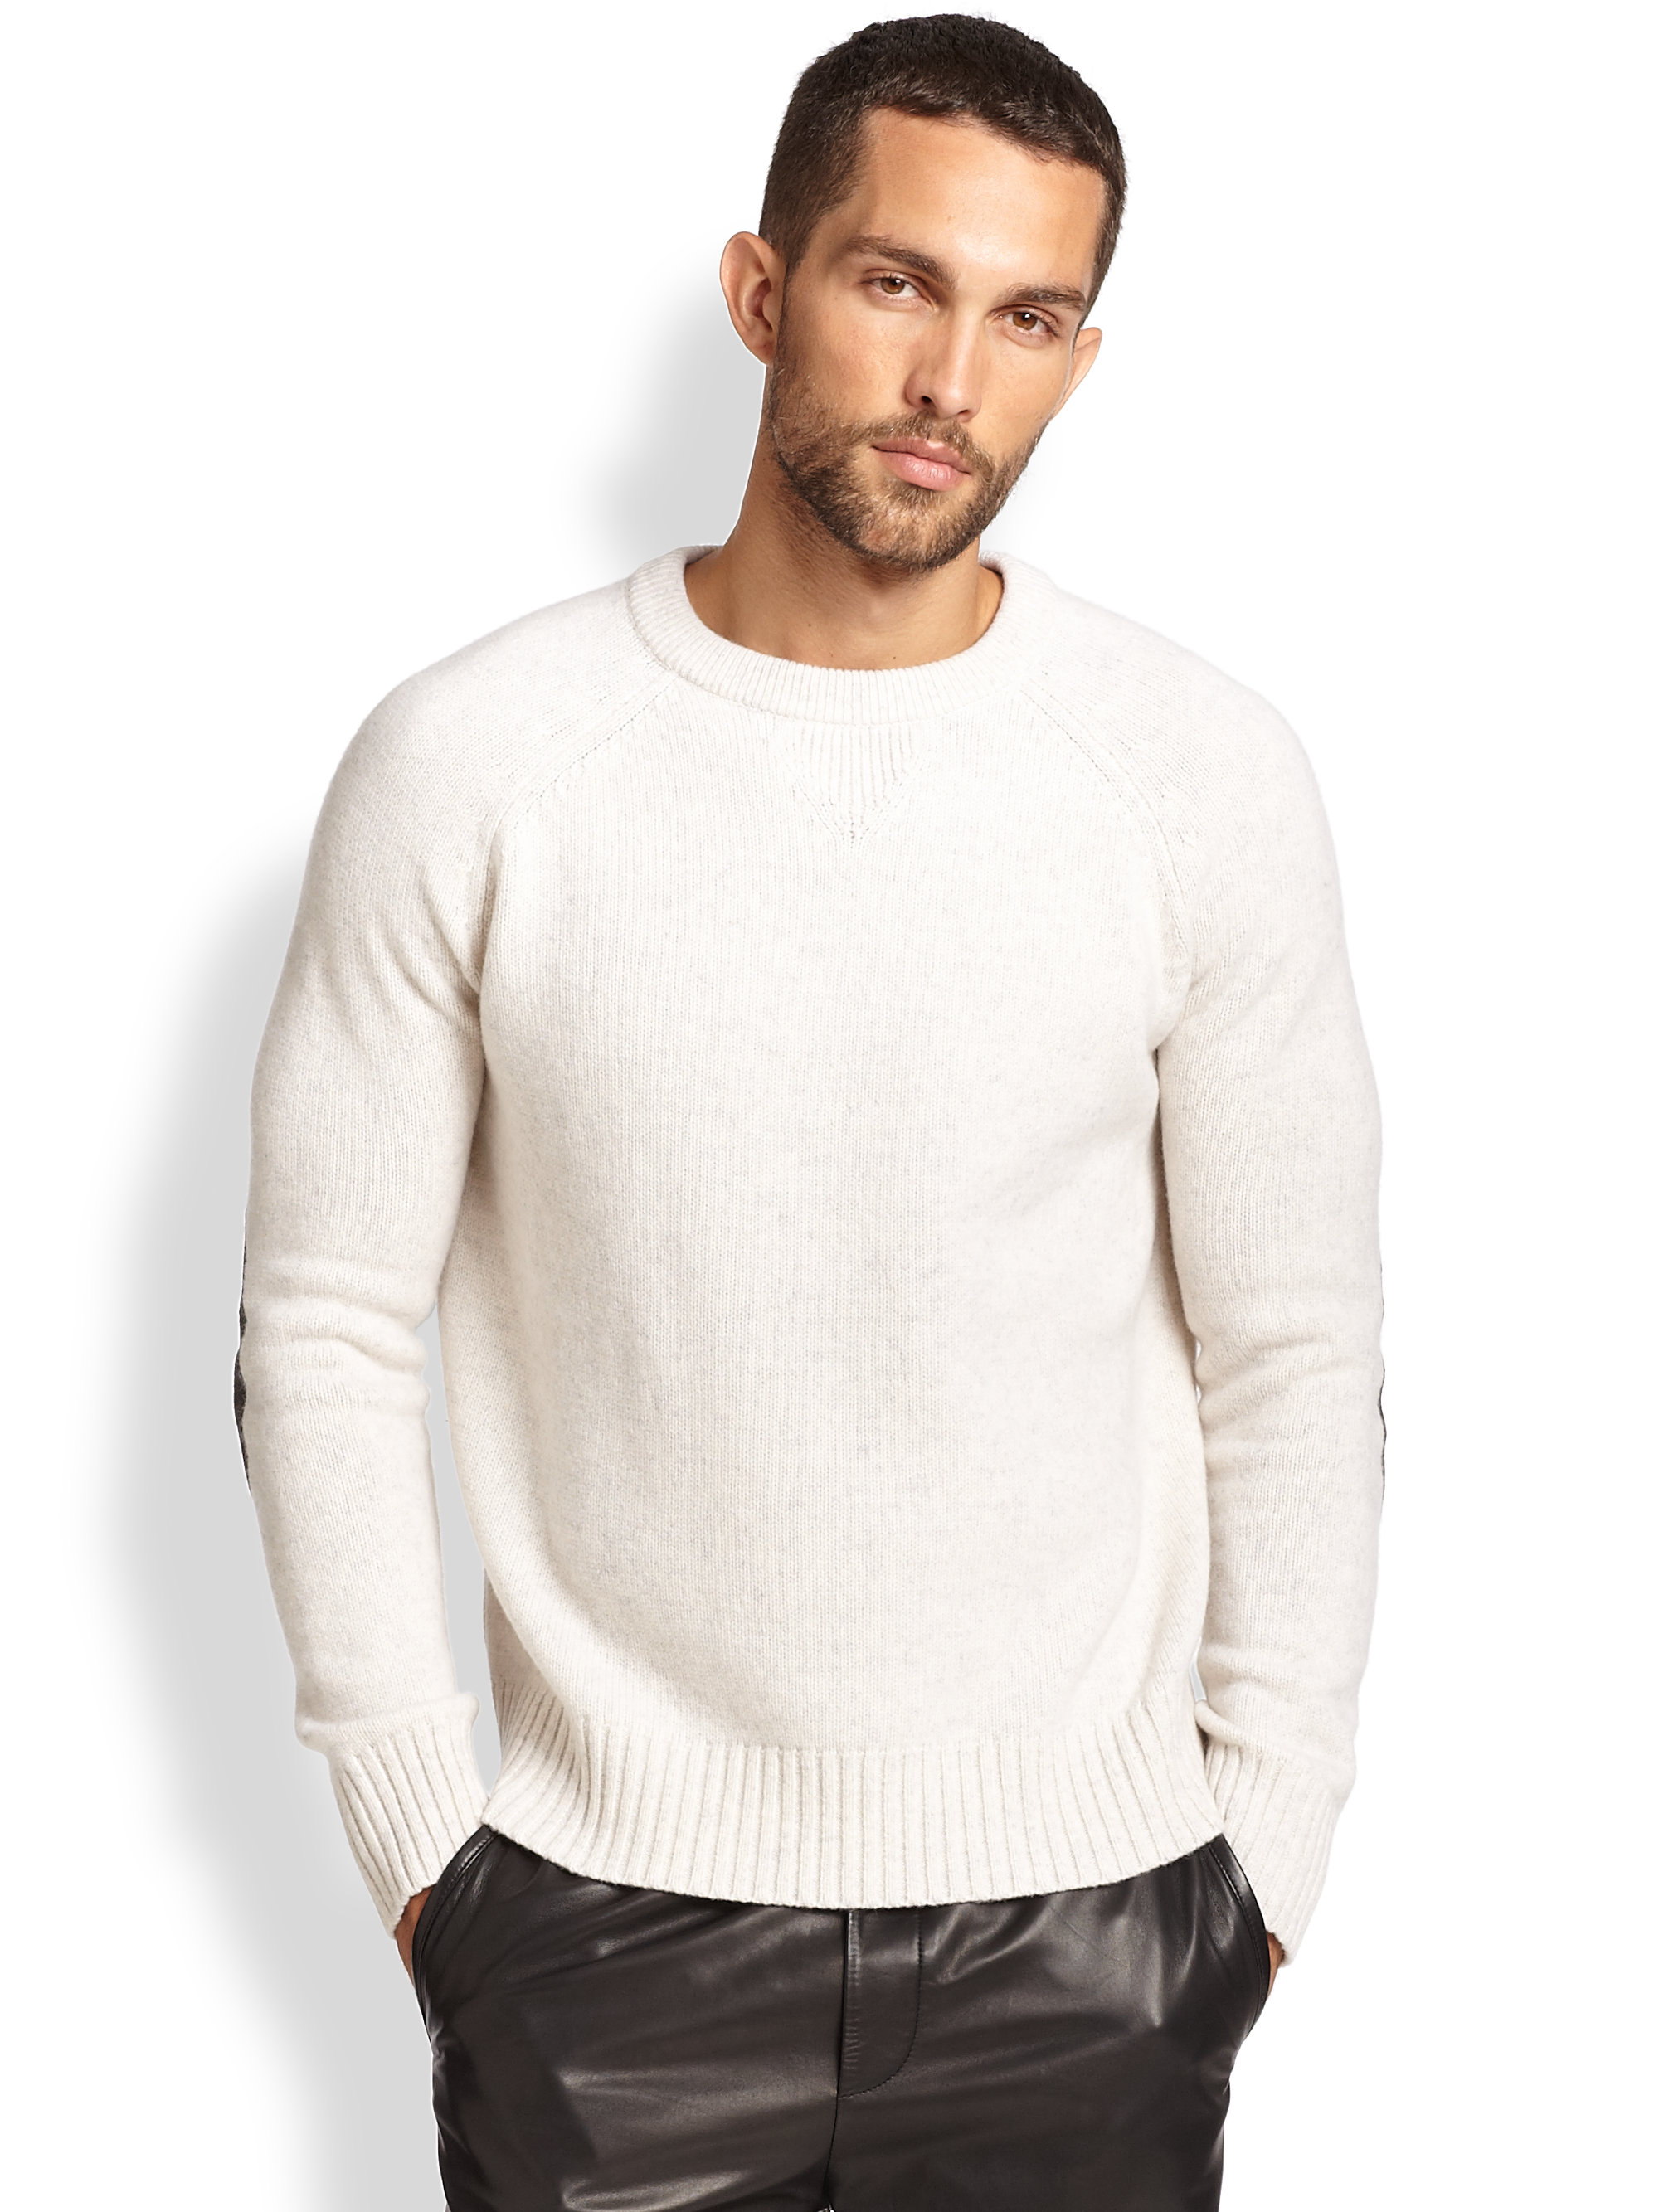 Vince Wool & Cashmere Crewneck Sweater in White for Men - Lyst